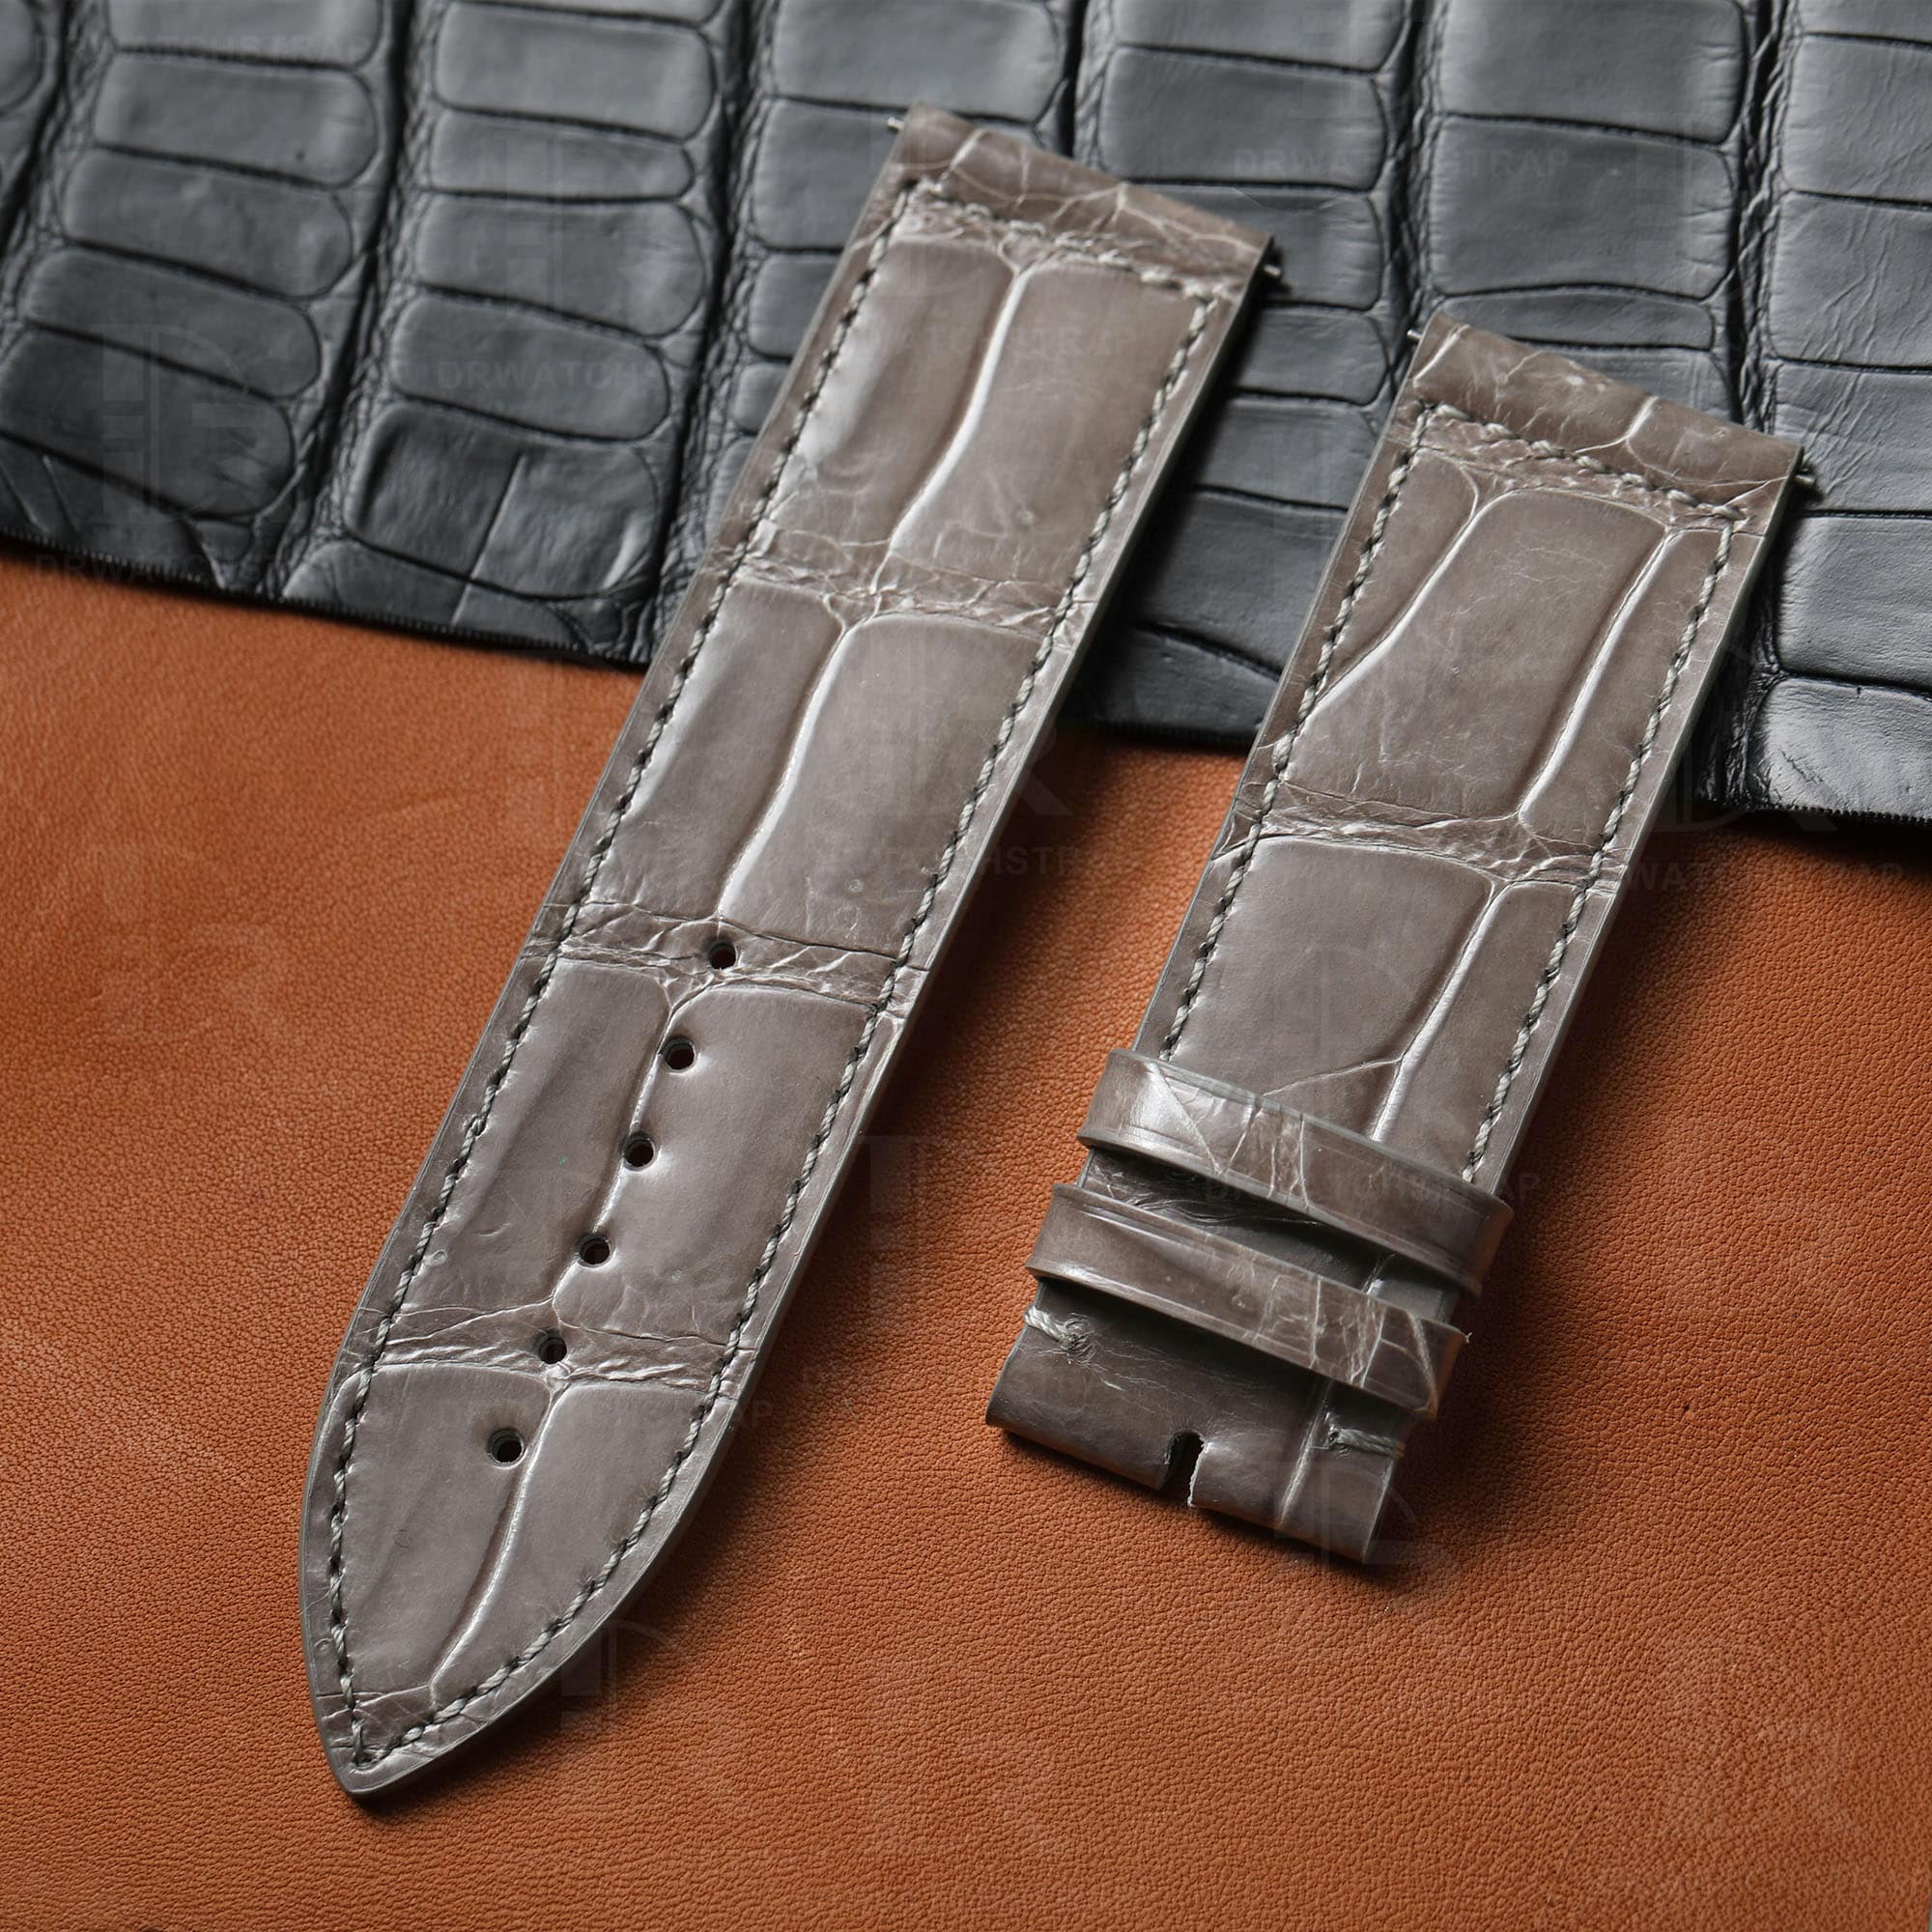 Custom handmade best quality grade A American crocodile 26mm Grey leather alligator strap and watch band replacement fit for Franck Muller Master Square 6000 h SC DT luxury watches online - High-end leather straps 100% hand stitched for sale